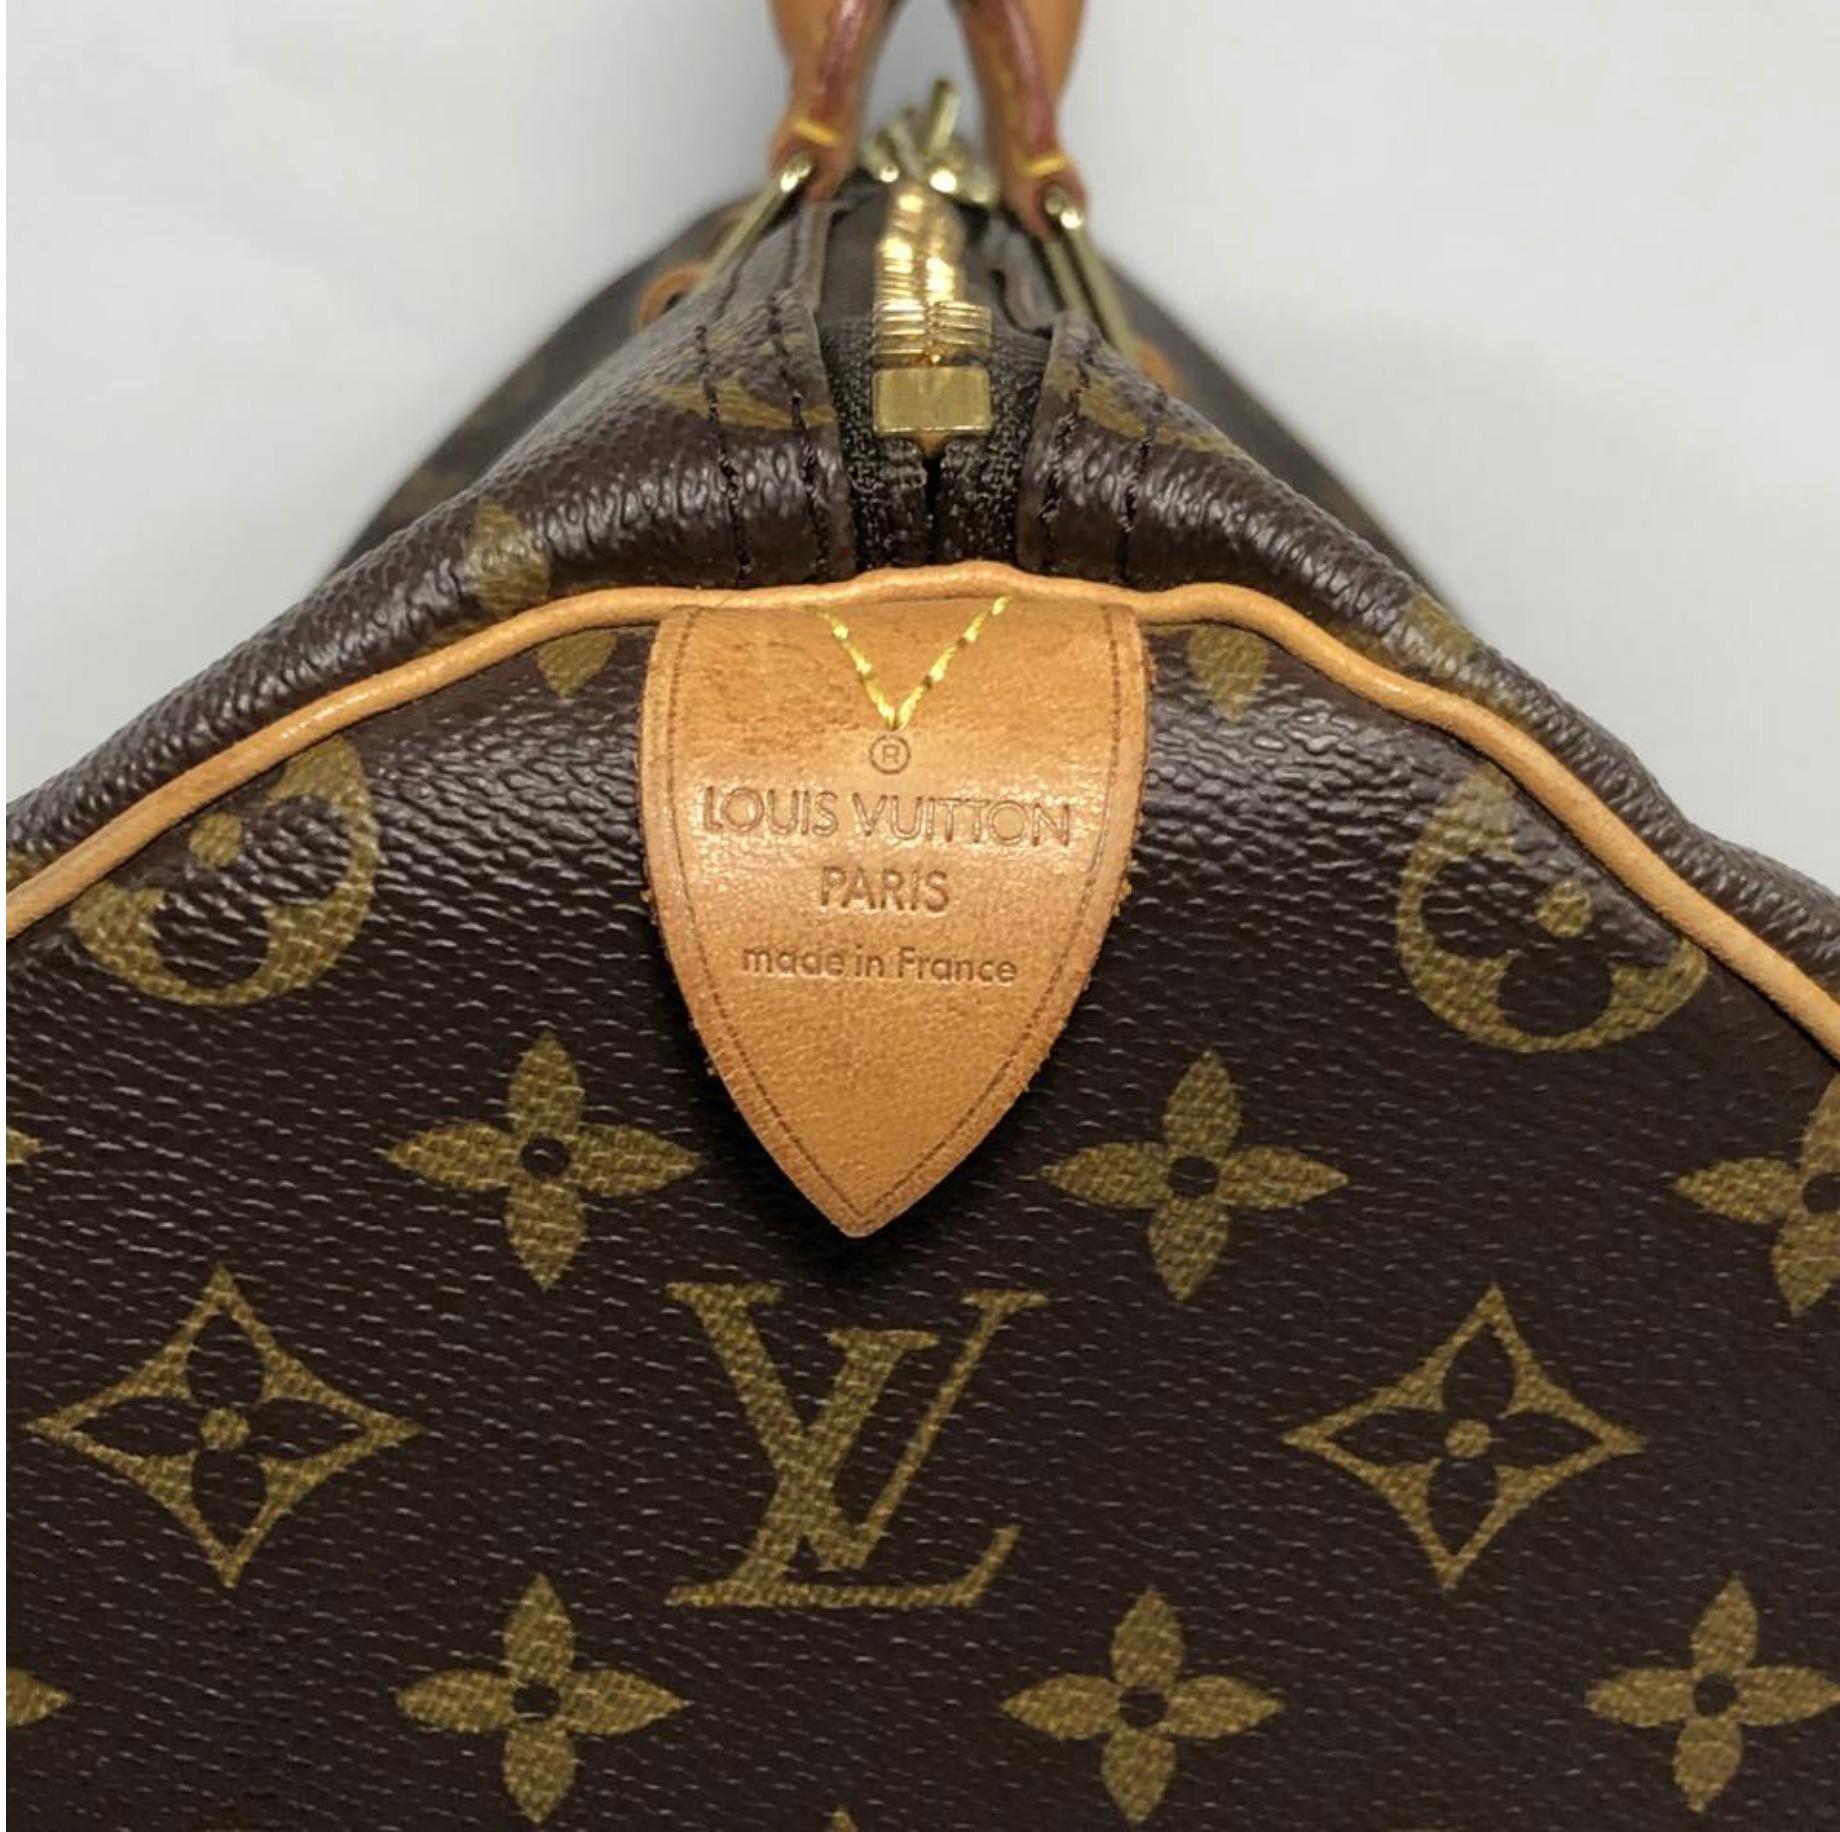  Louis Vuitton Monogram Keepall 50 Travel Bag In Good Condition For Sale In Saint Charles, IL